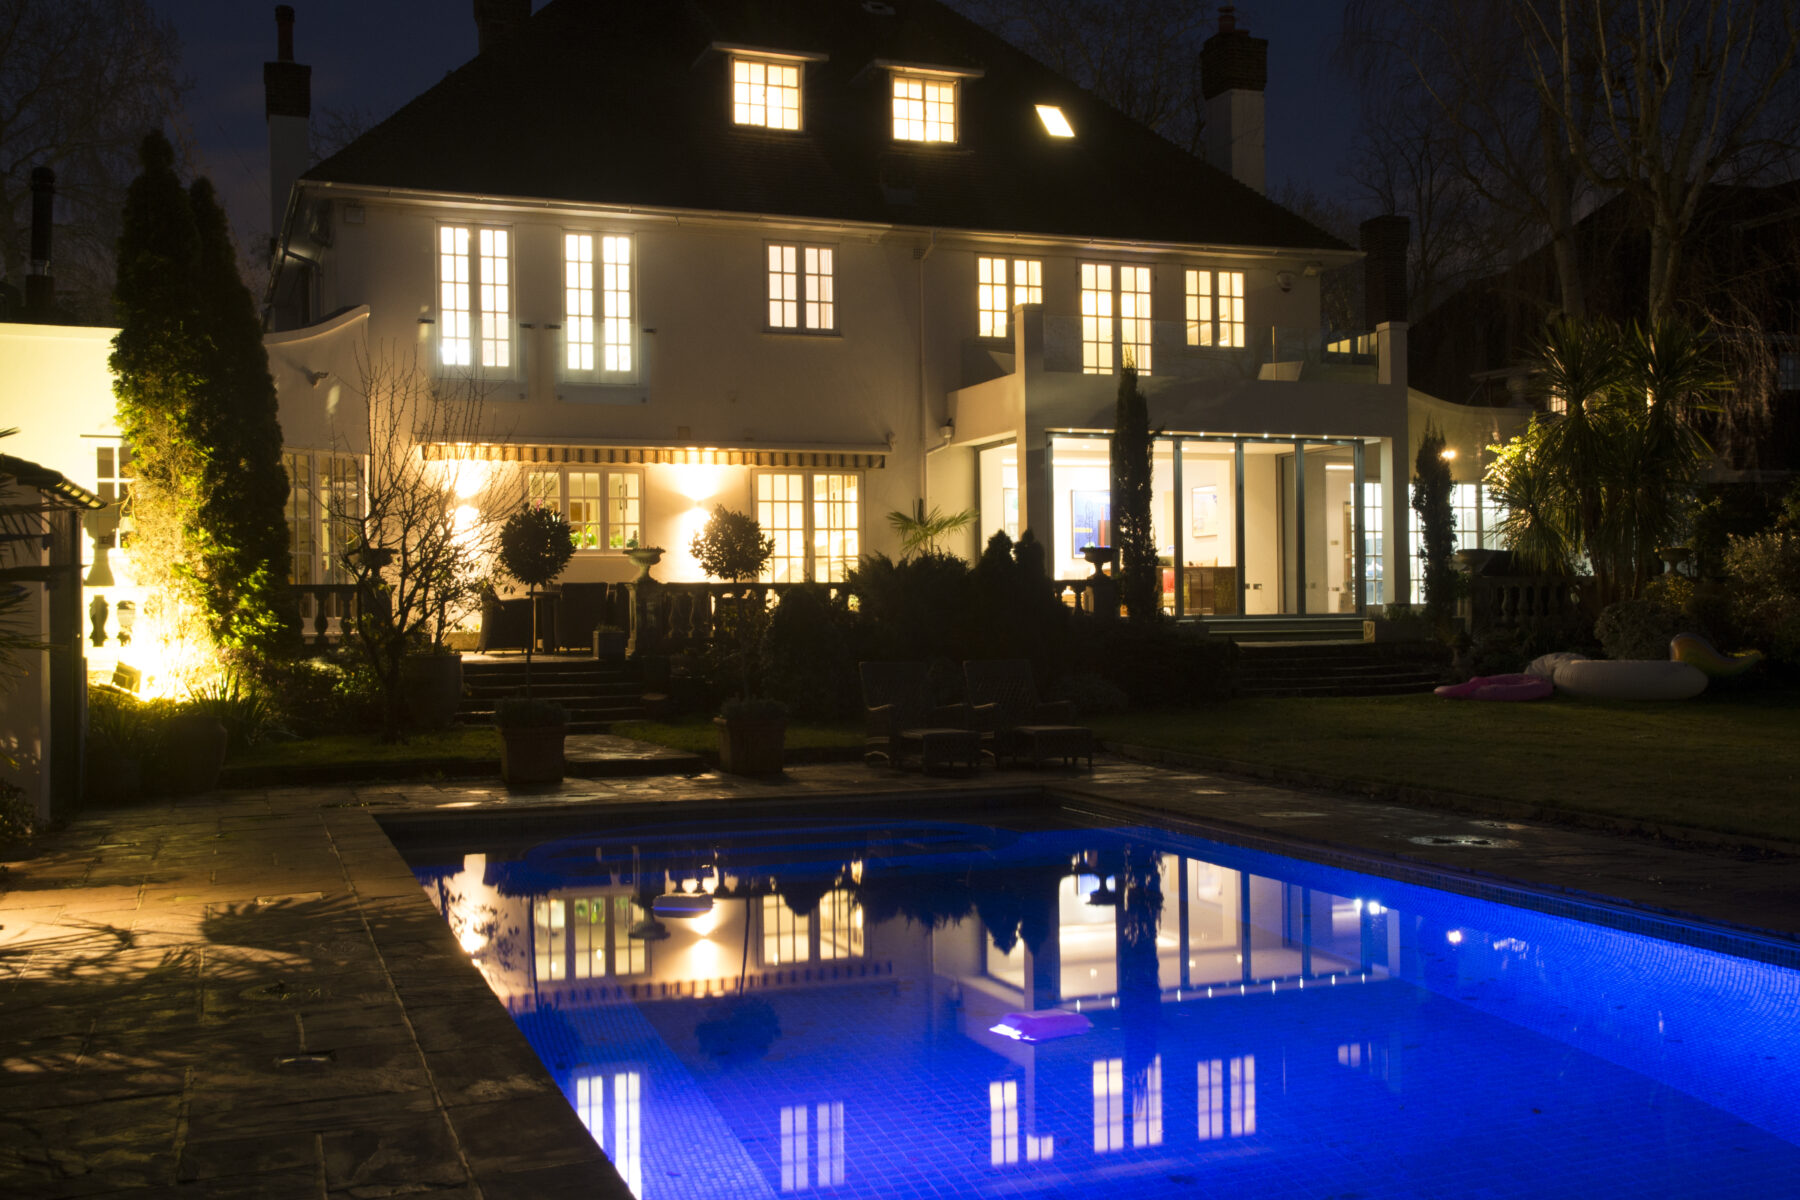 Garden white house nighttime trees 1930s lighting swimming pool lights TV filming location hire lodge London 17